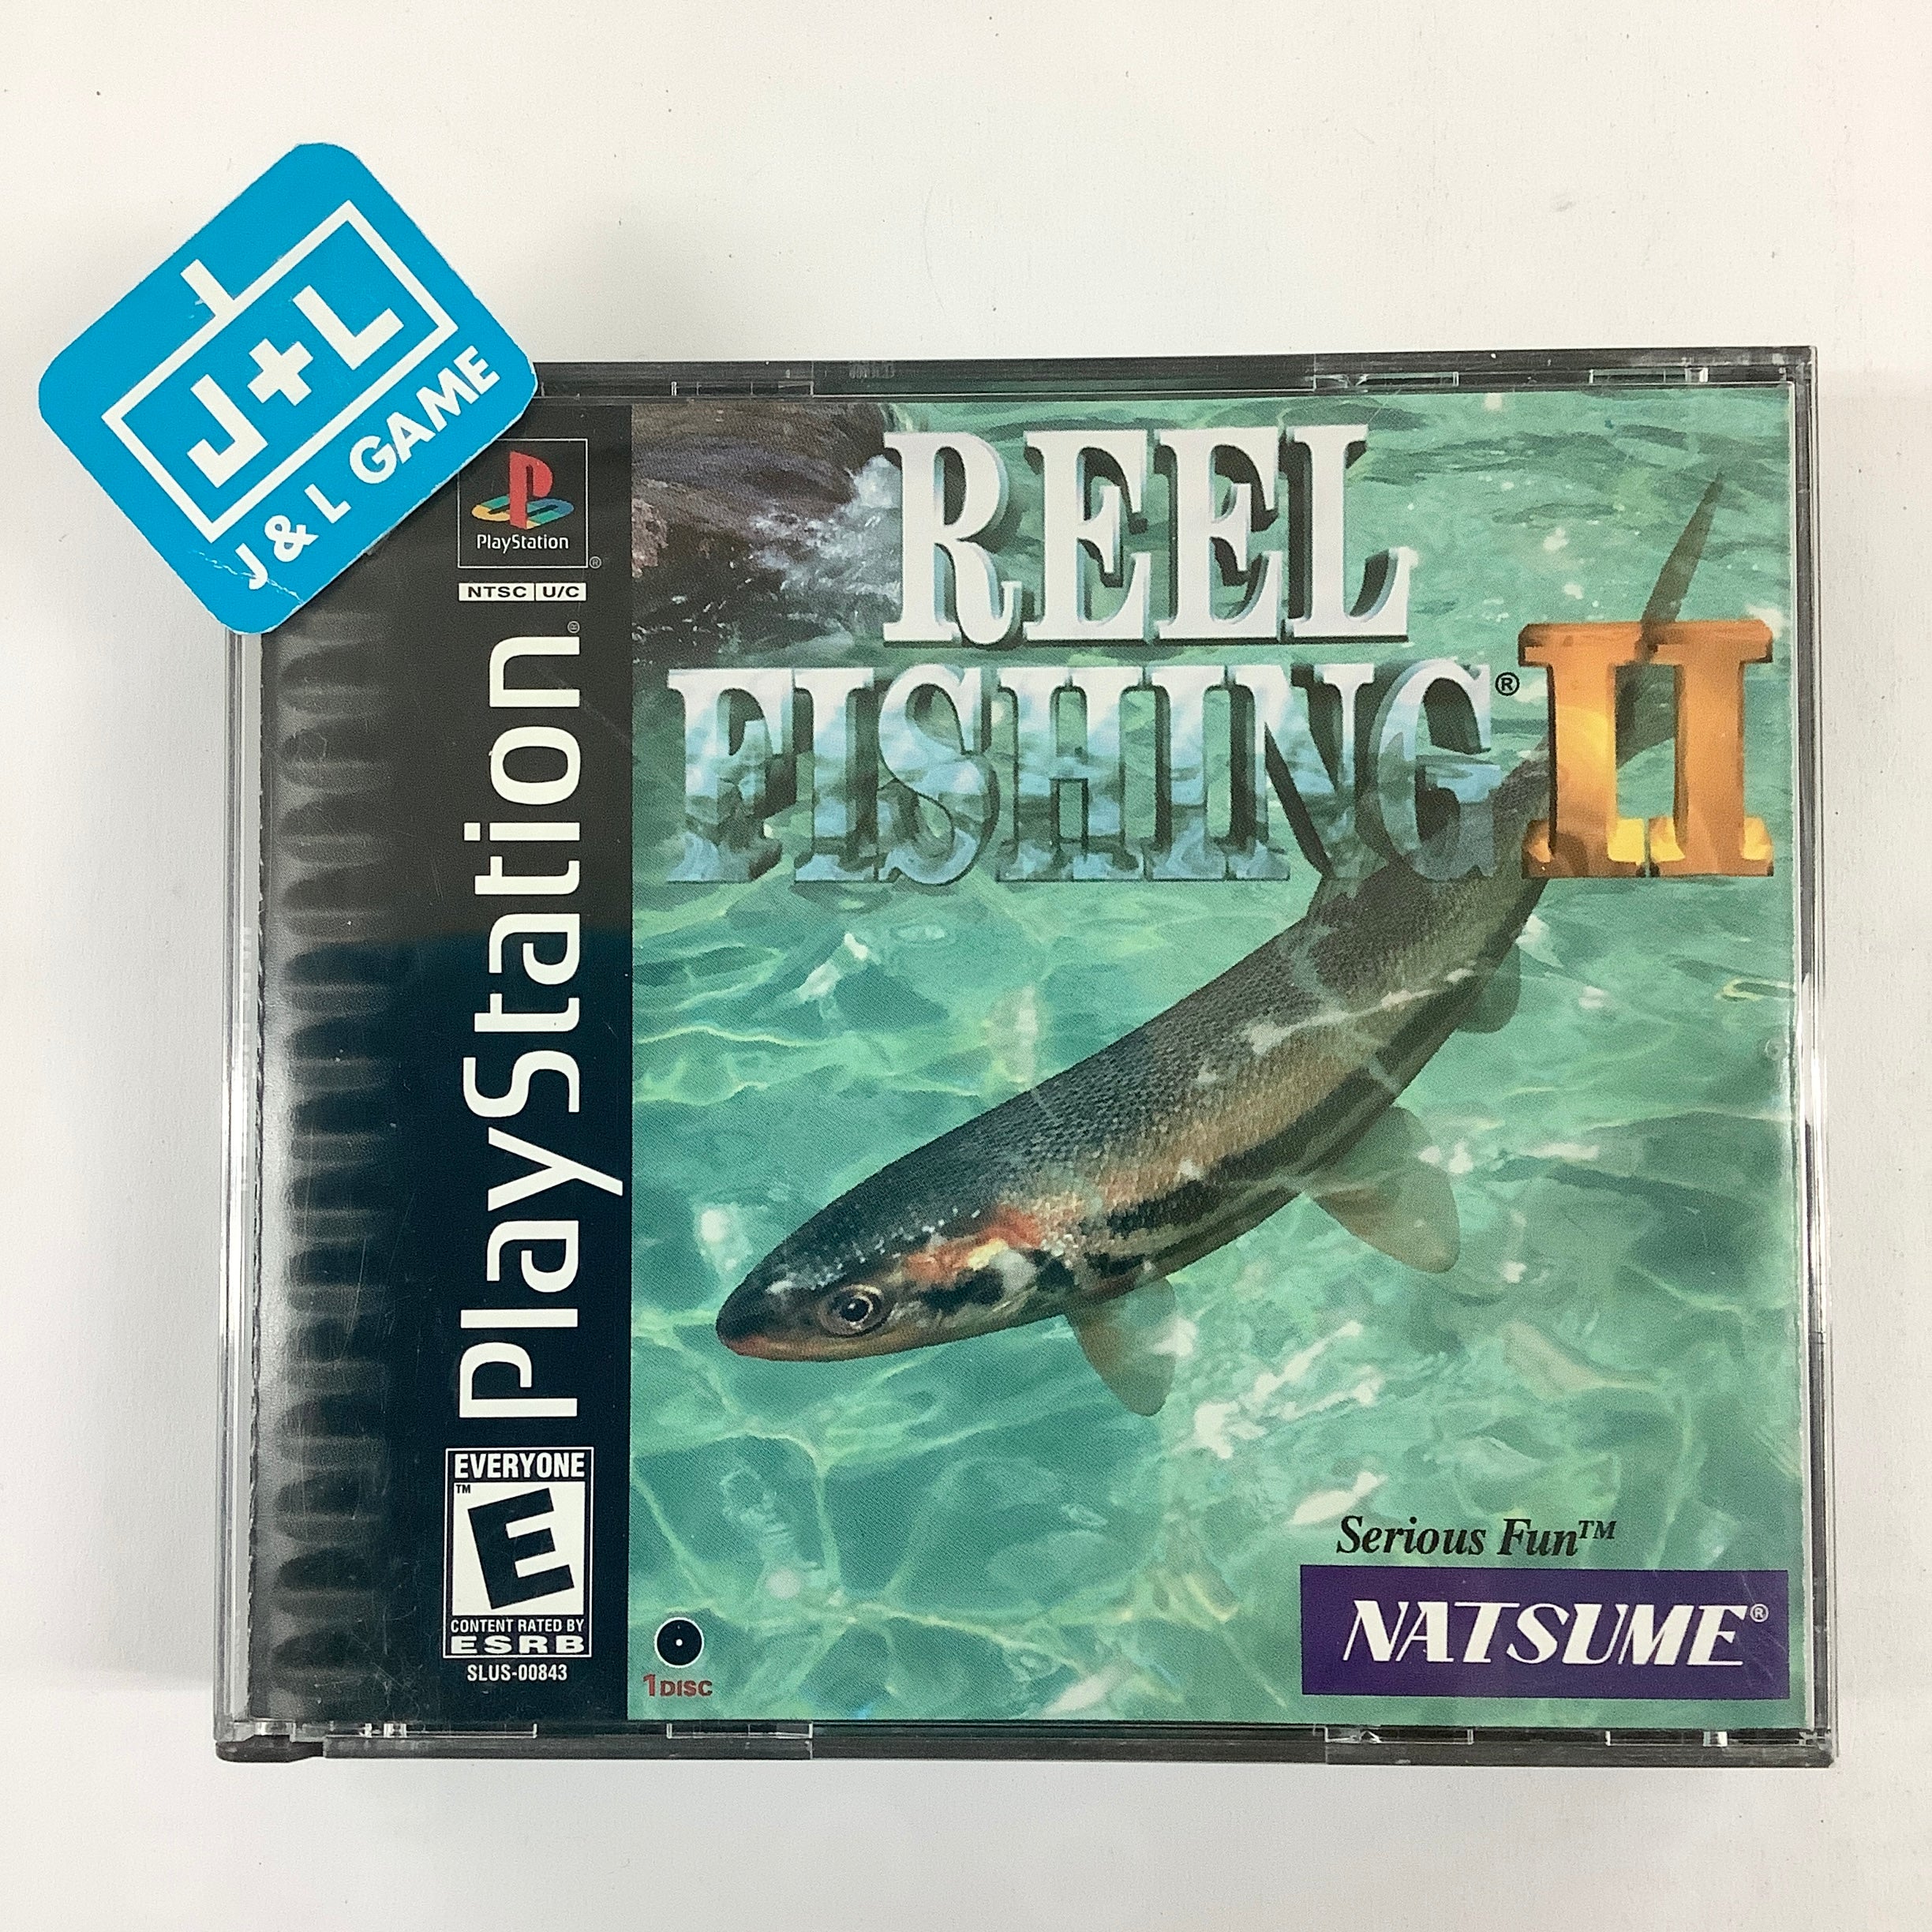 Reel Fishing II PS1 Game - Disc Only